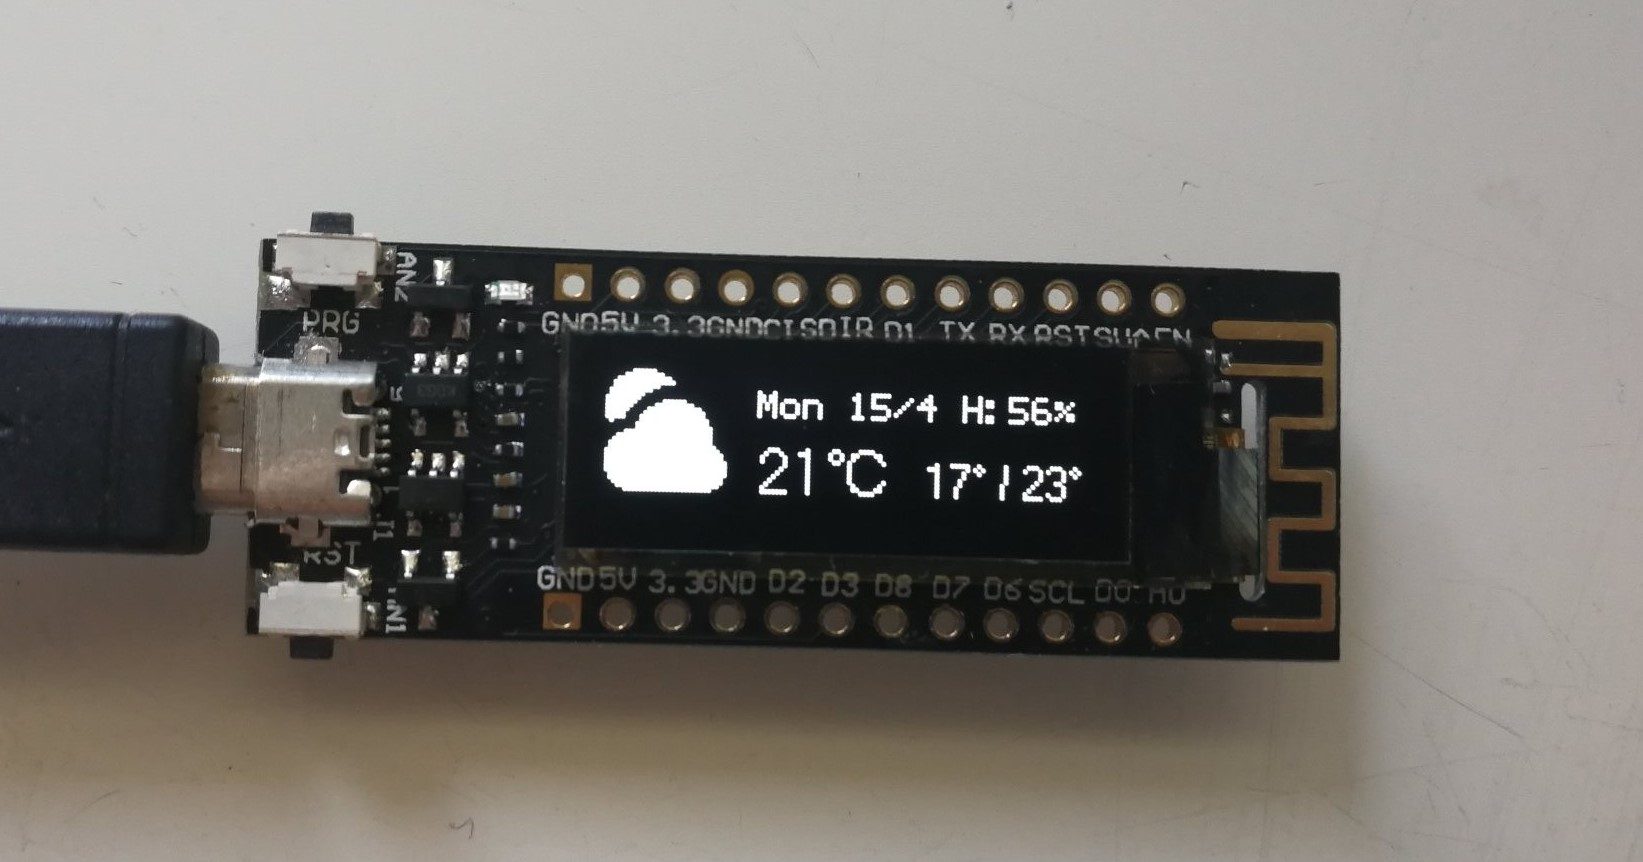 instructables wifi weather display with esp8266